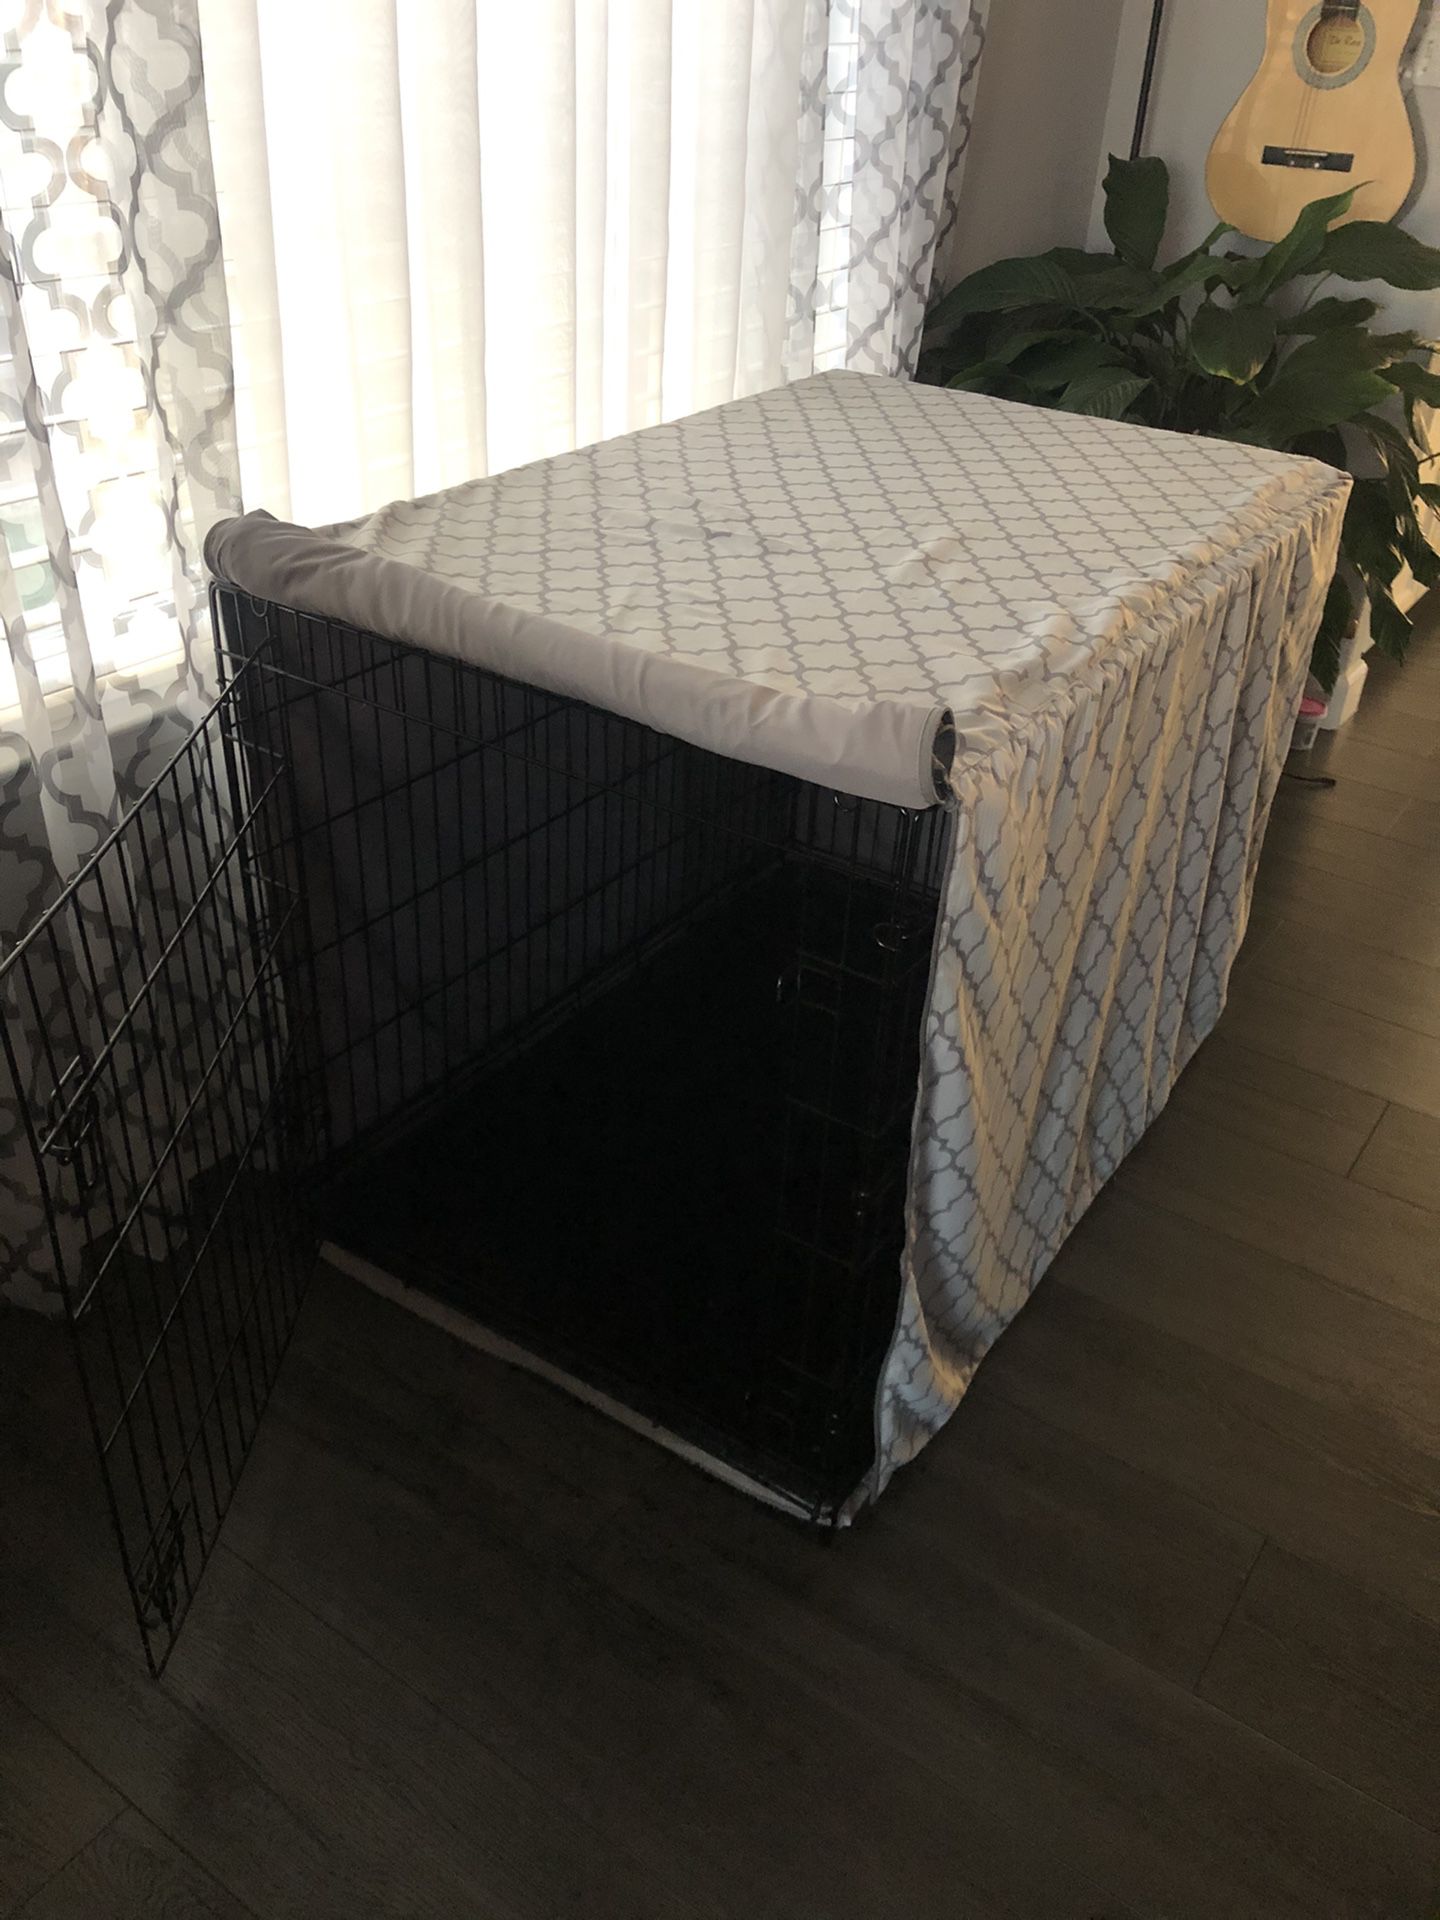 XL 42” Dog Crate with Cover